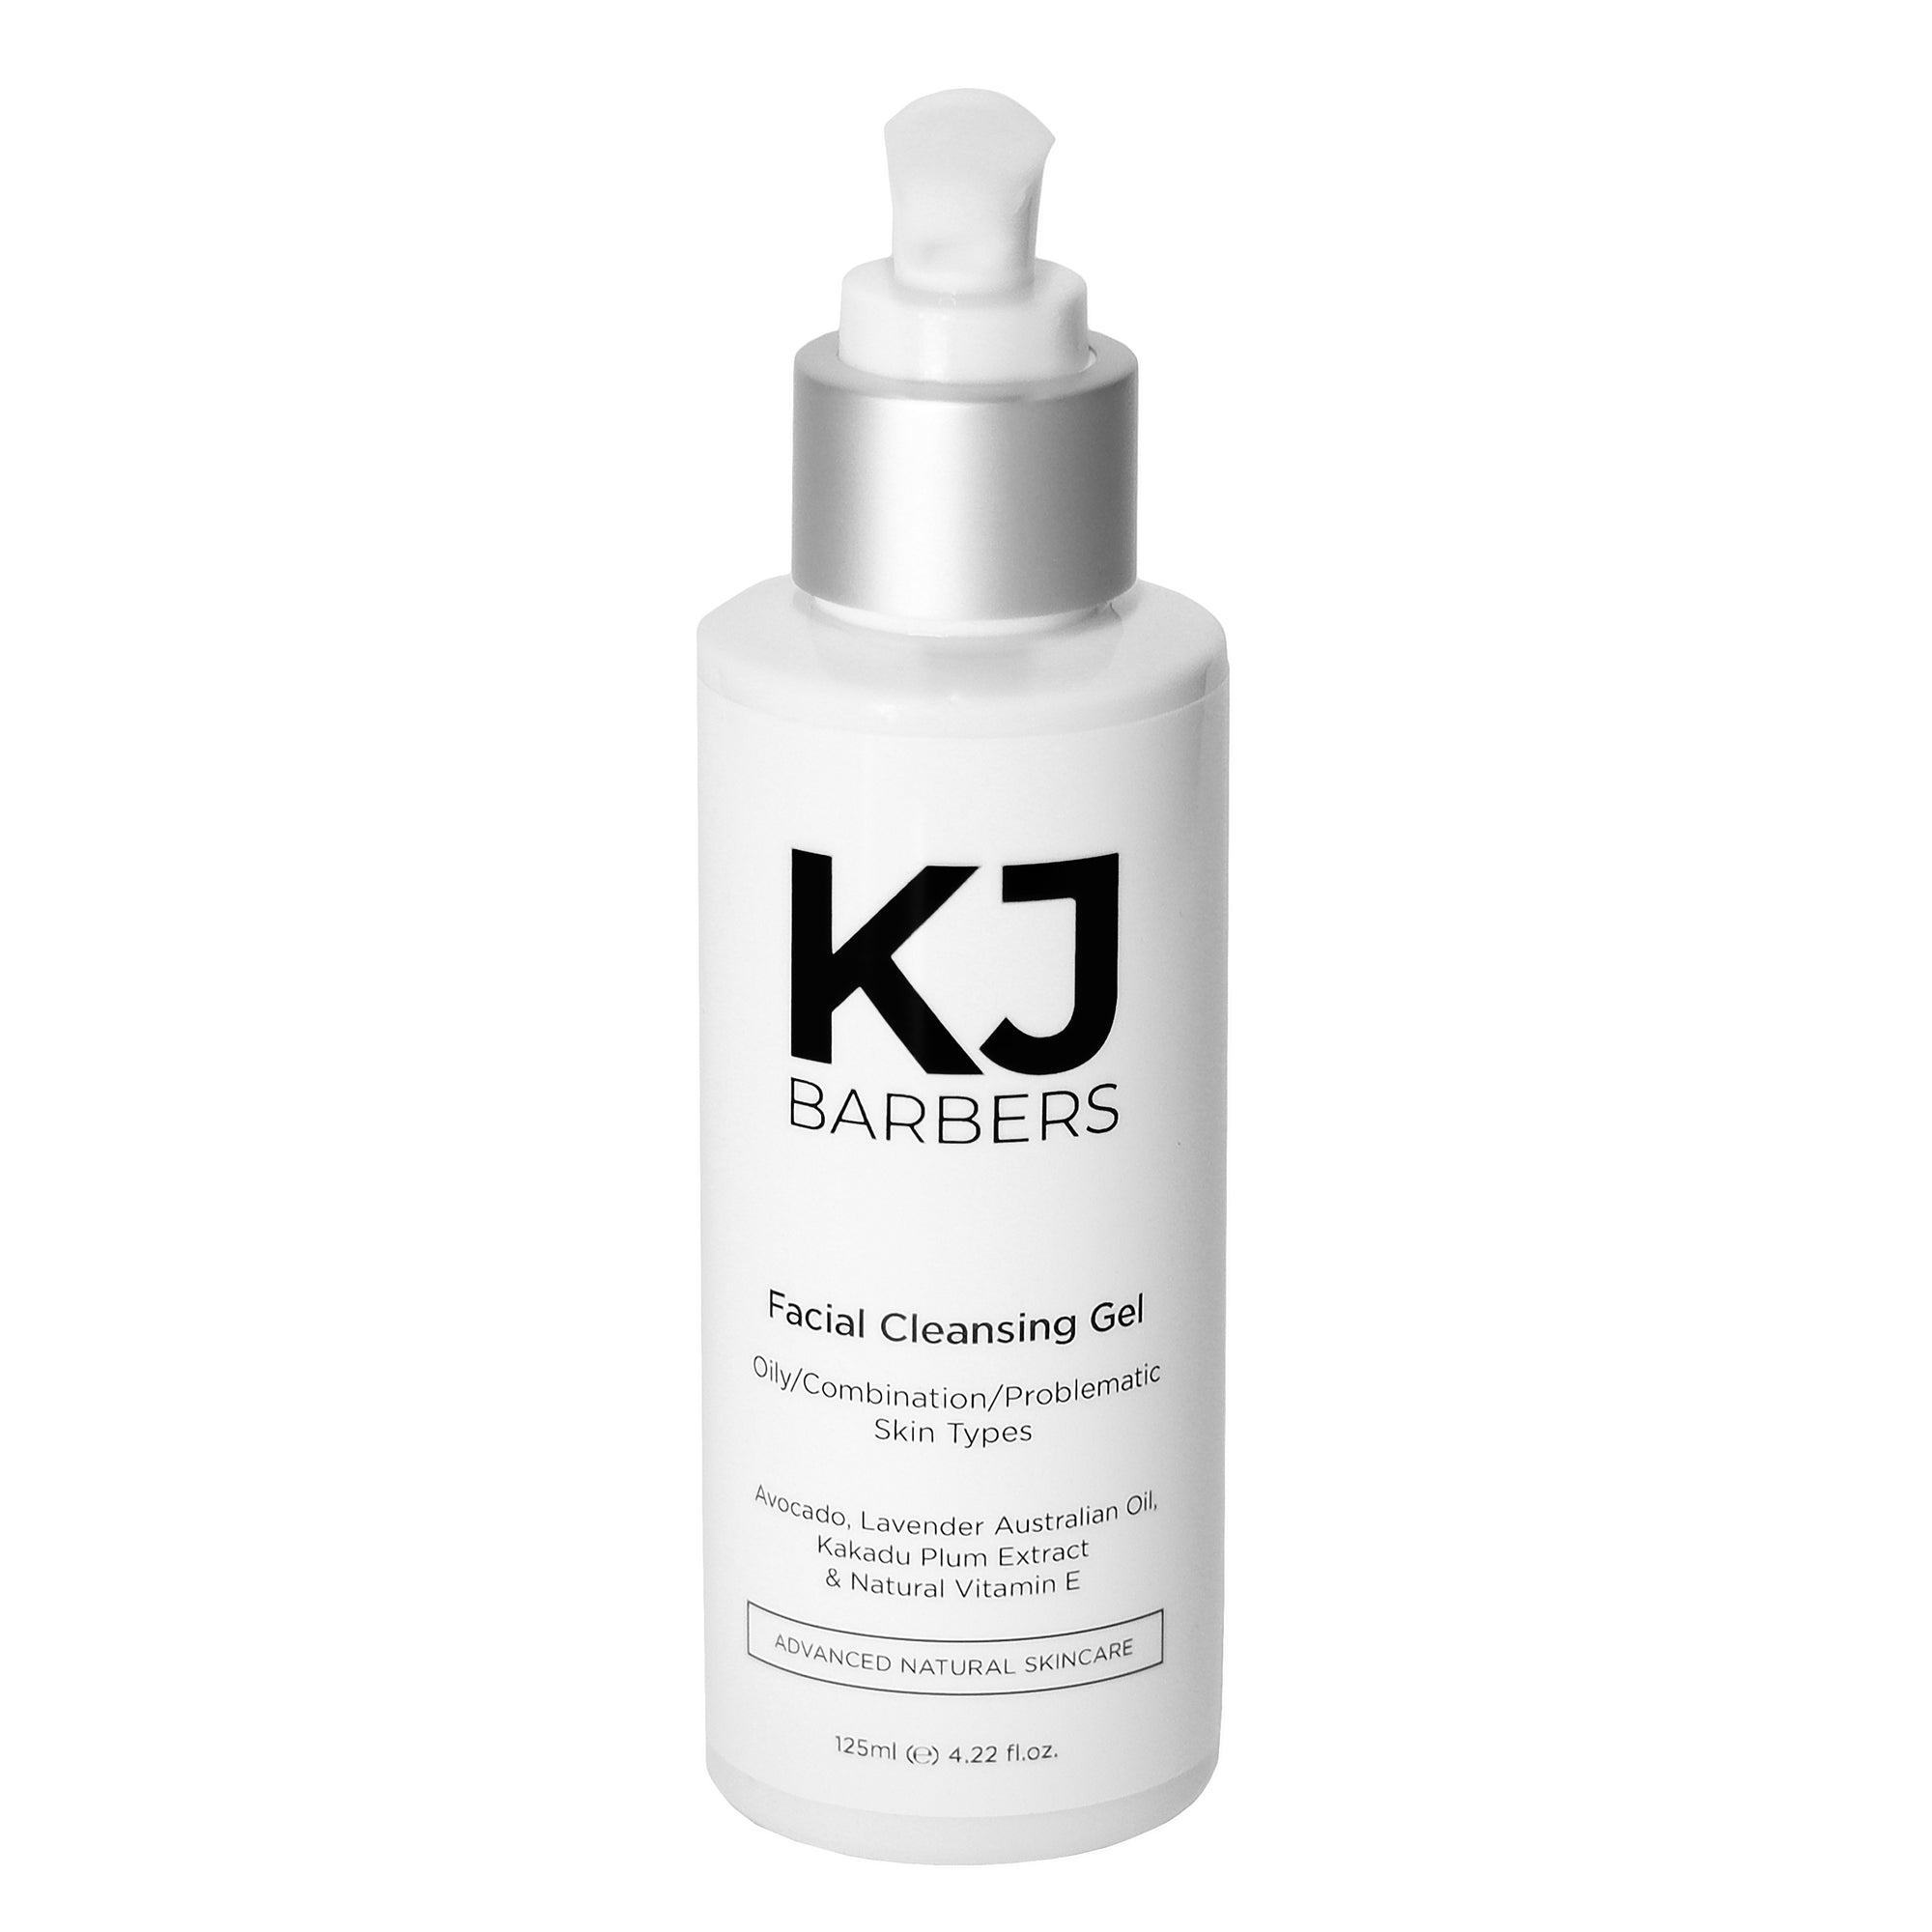 KJ Barbers Facial Cleansing Gel foams up and helps to hydrate and moisturise the skin.